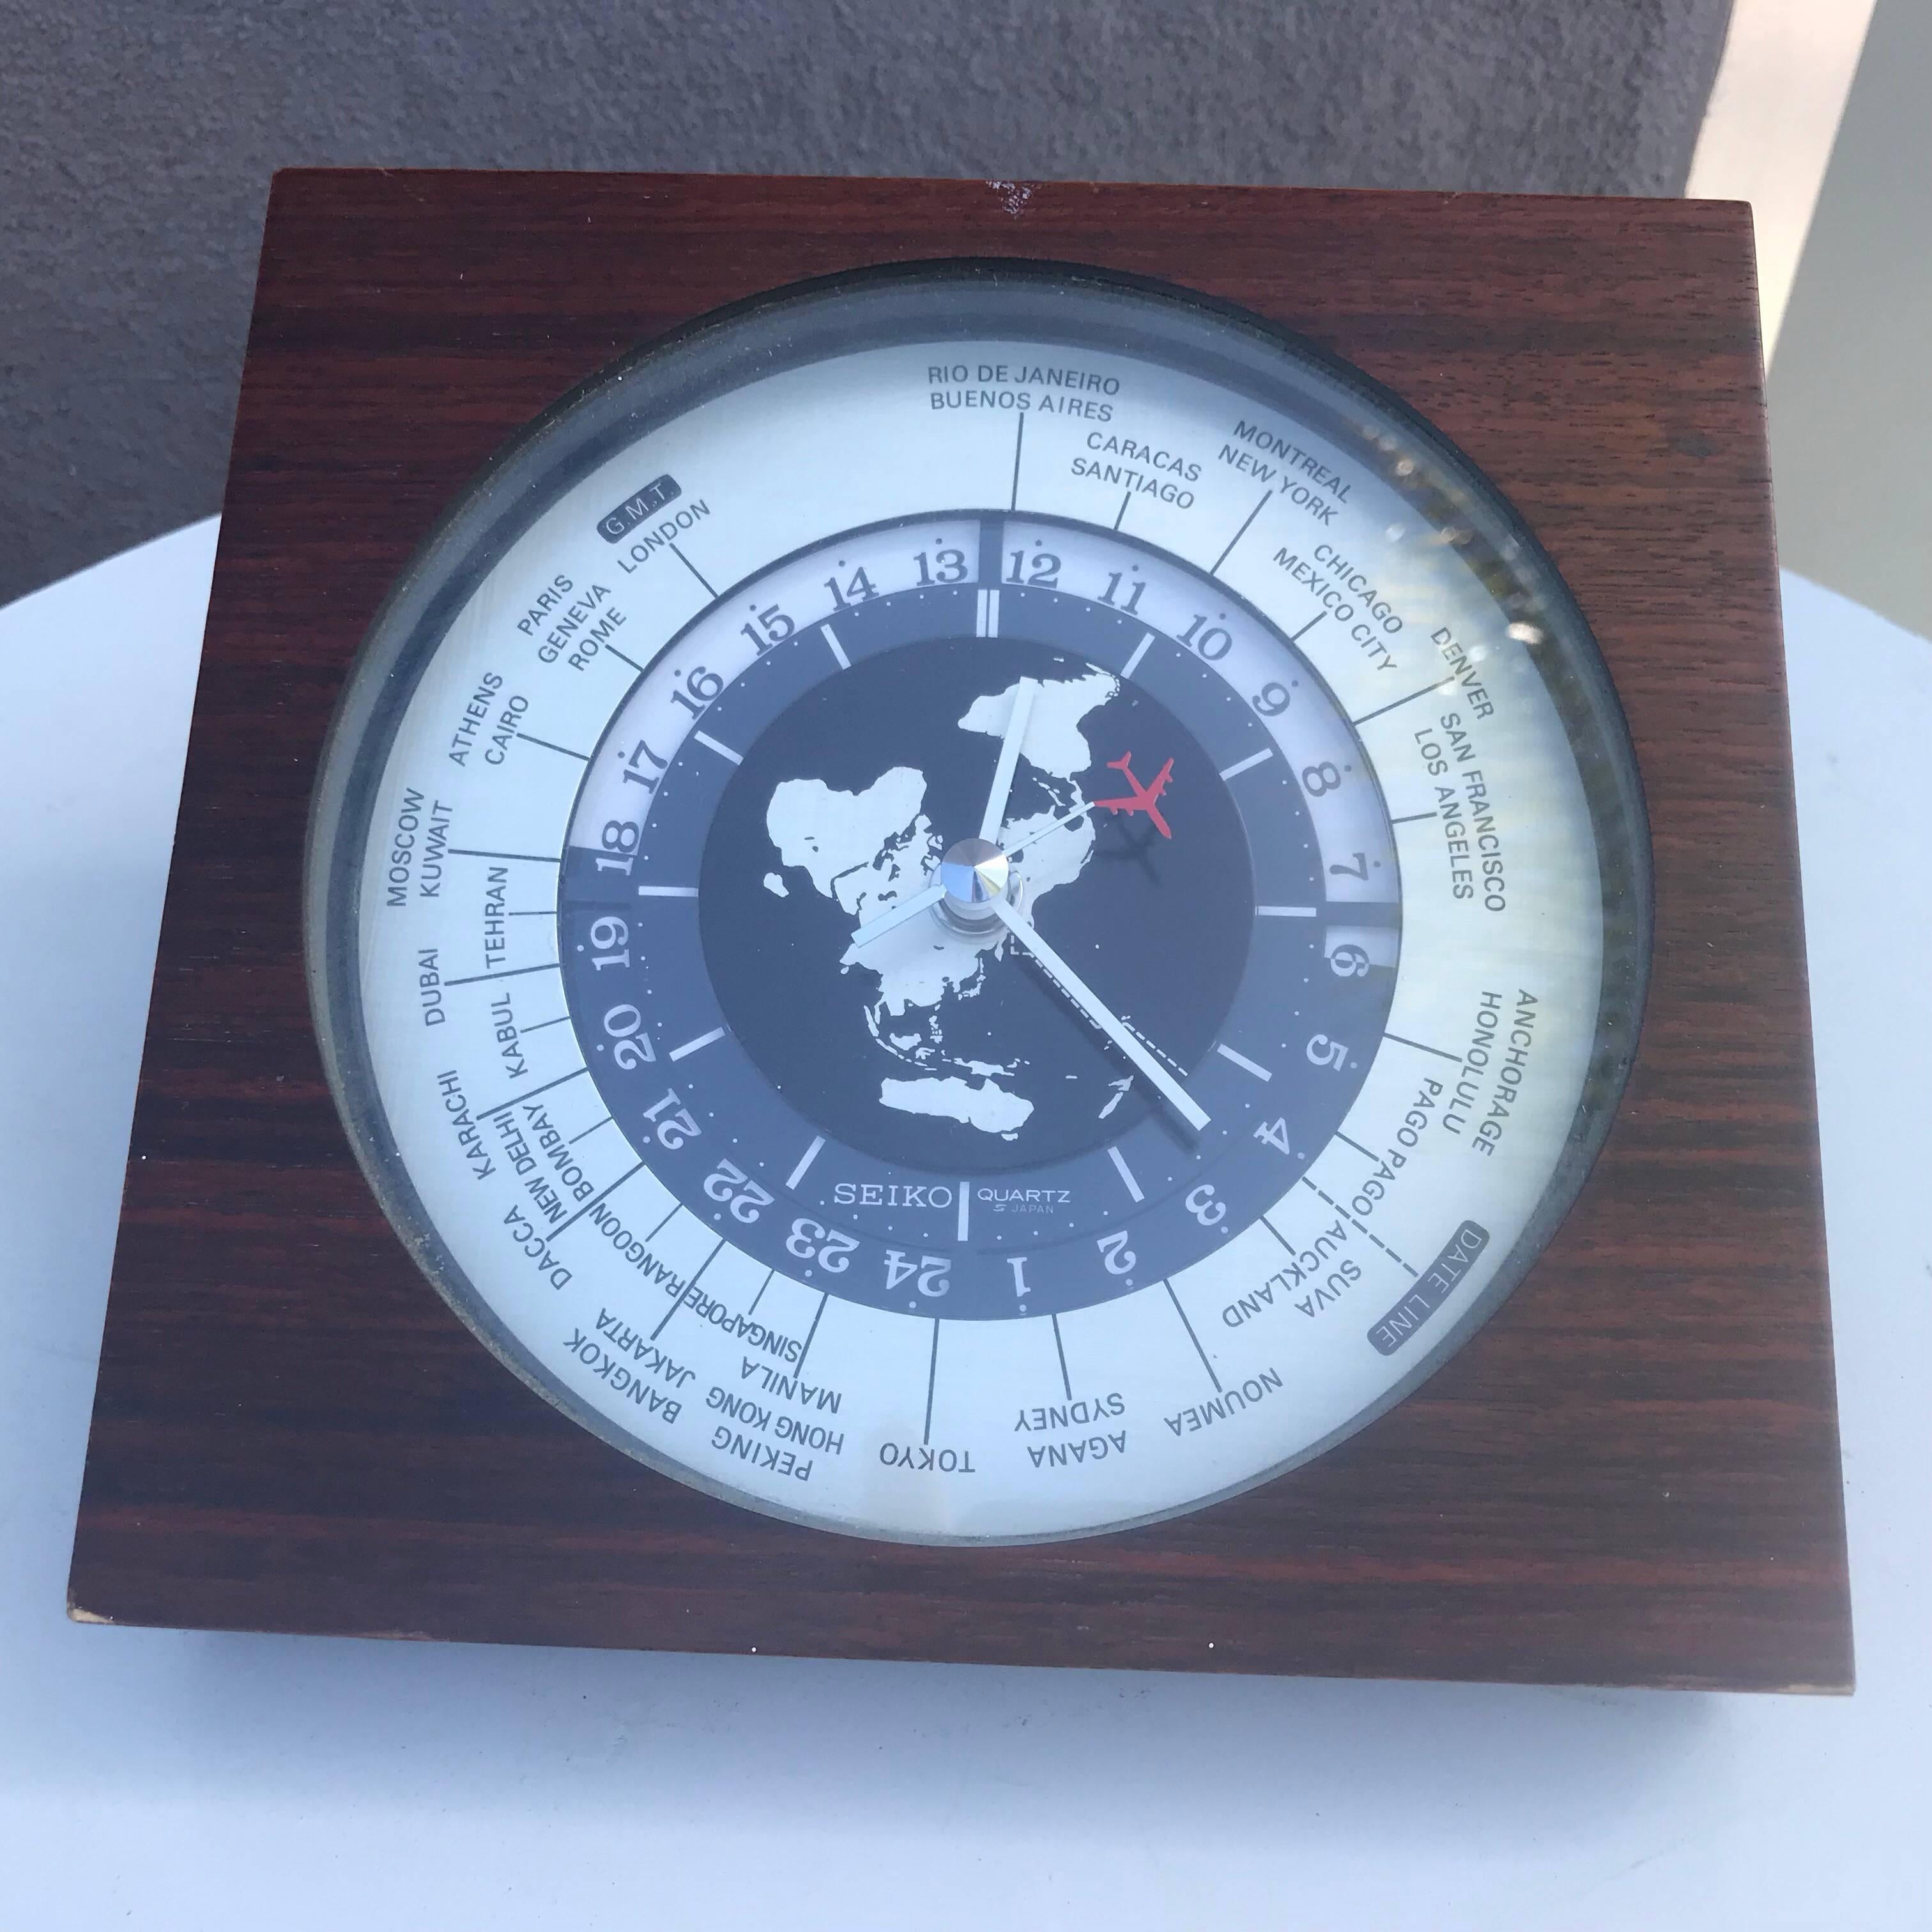 For your consideration, a midcentury Japanese world desk clock rosewood frame.
Dimensions: 9 7/8